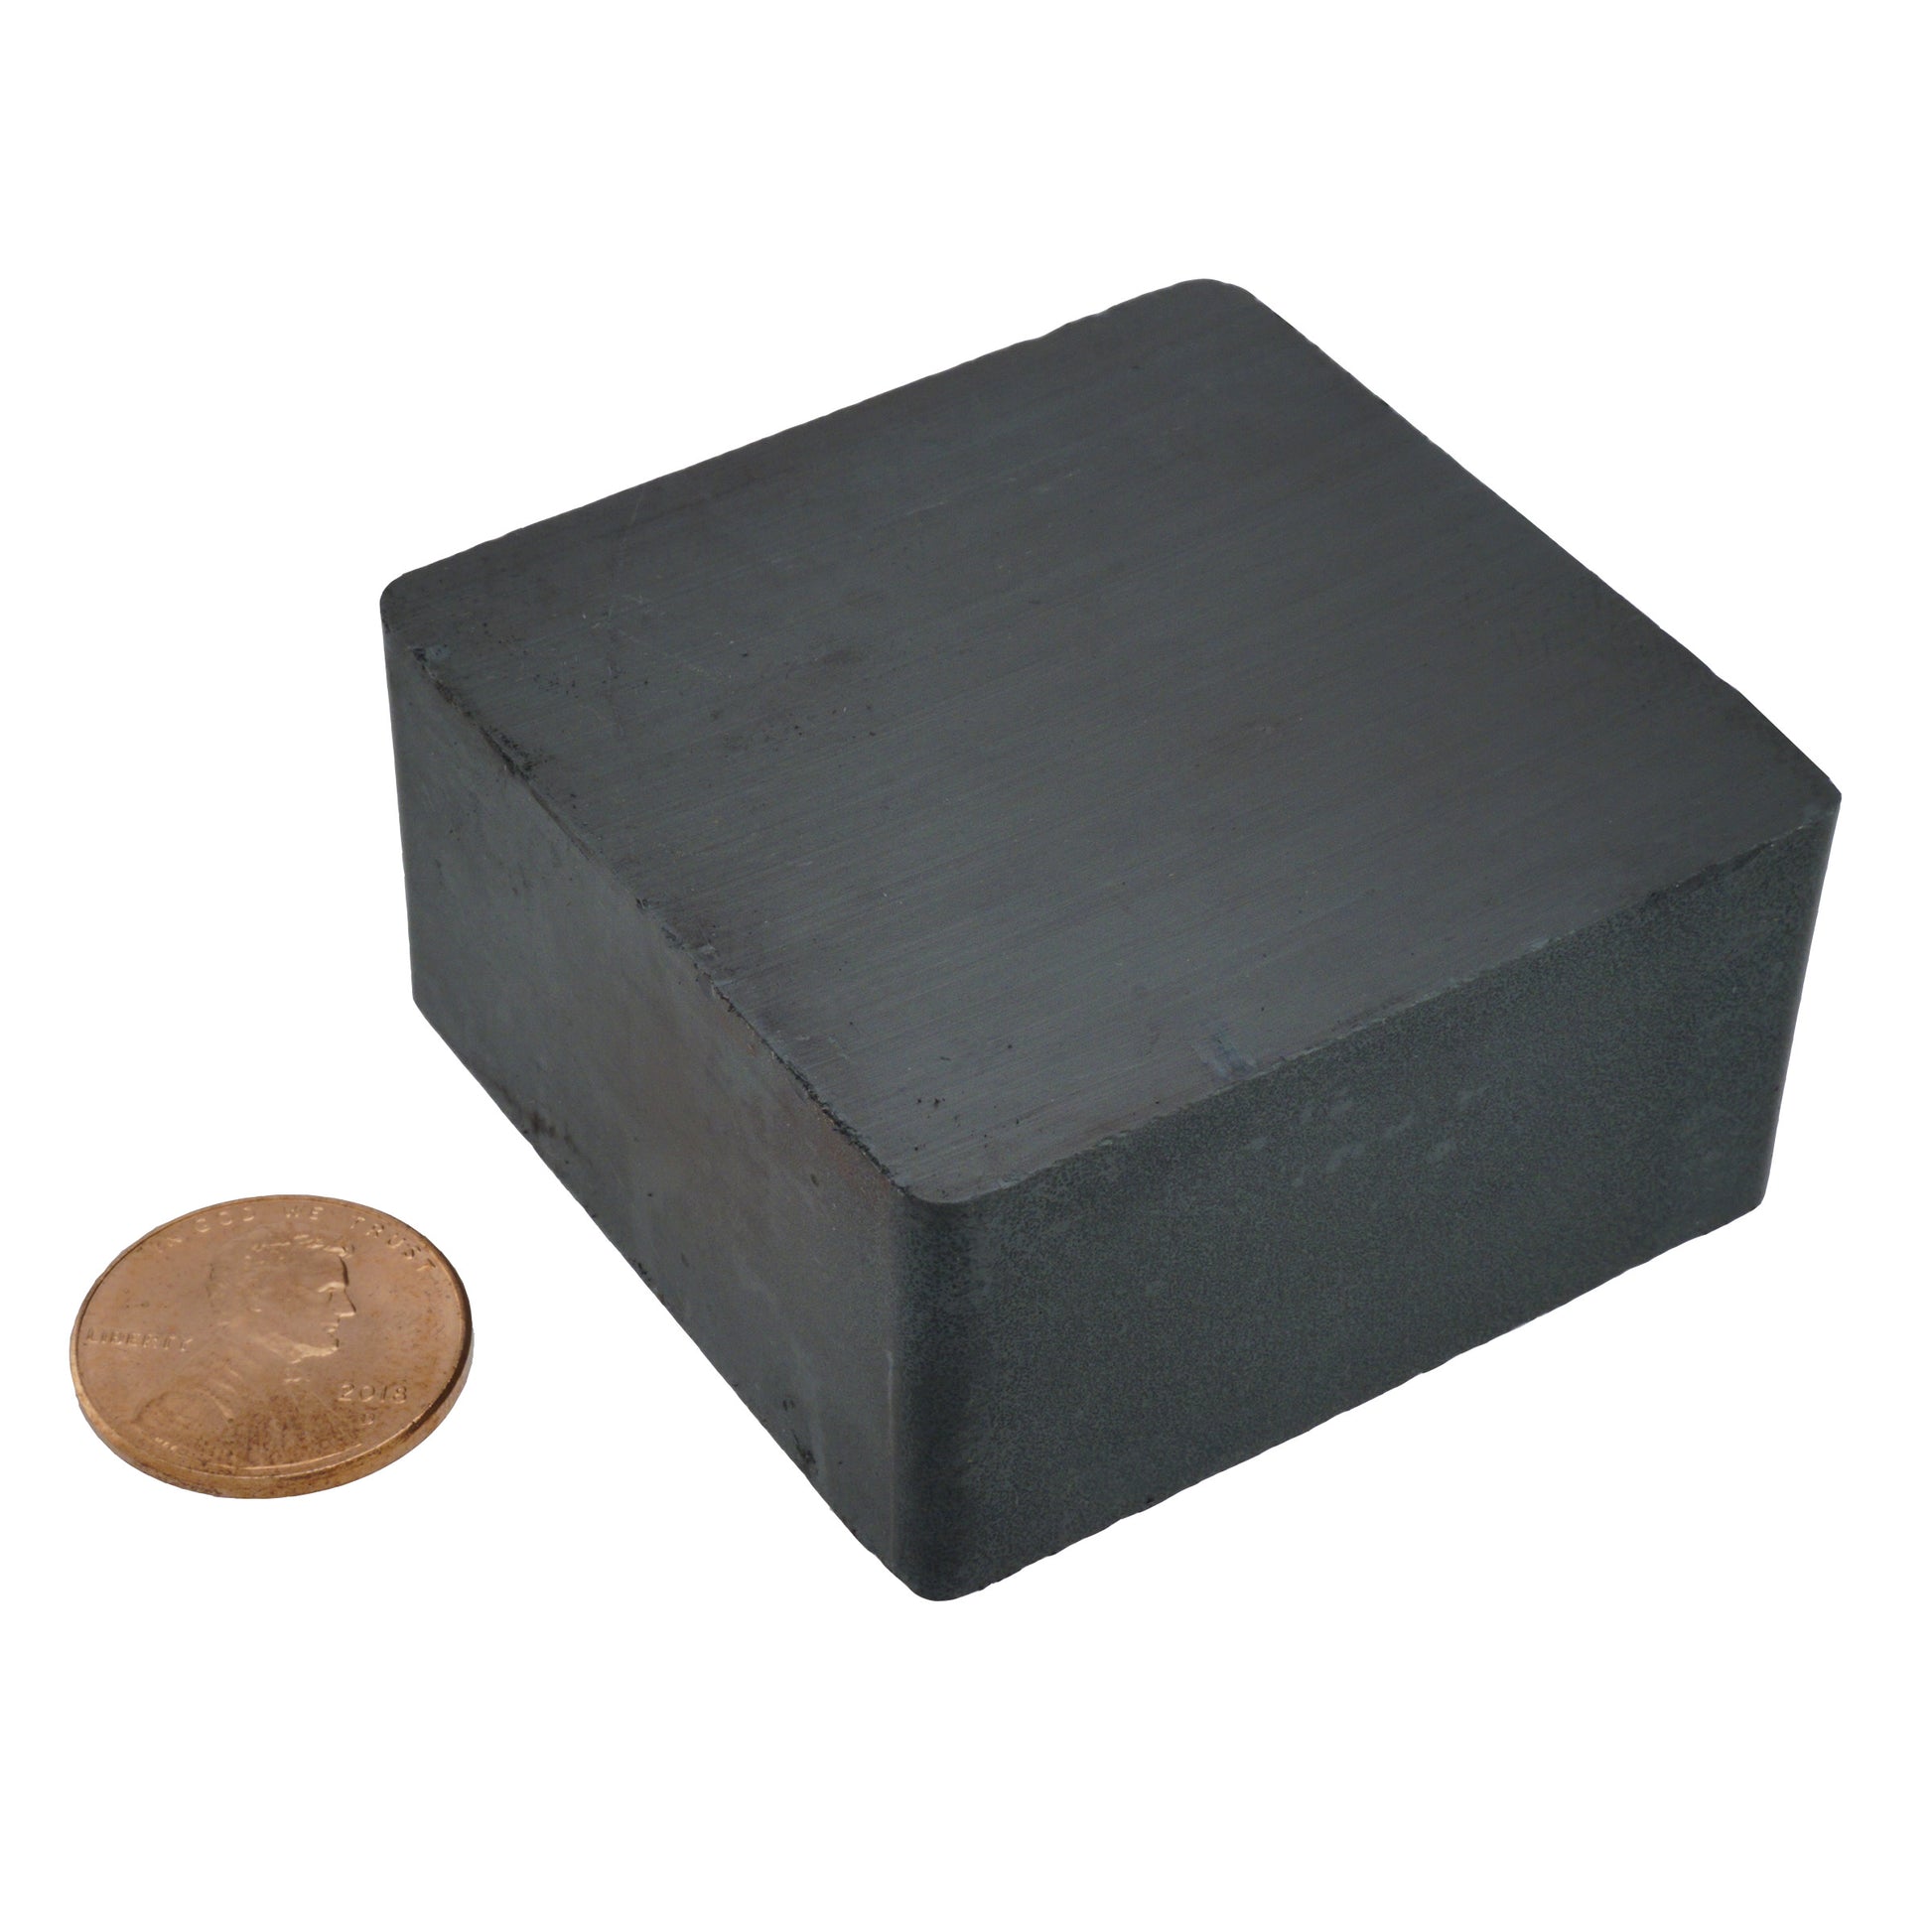 Load image into Gallery viewer, CB1862N Ceramic Block Magnet - Compared to Penny for Size Reference